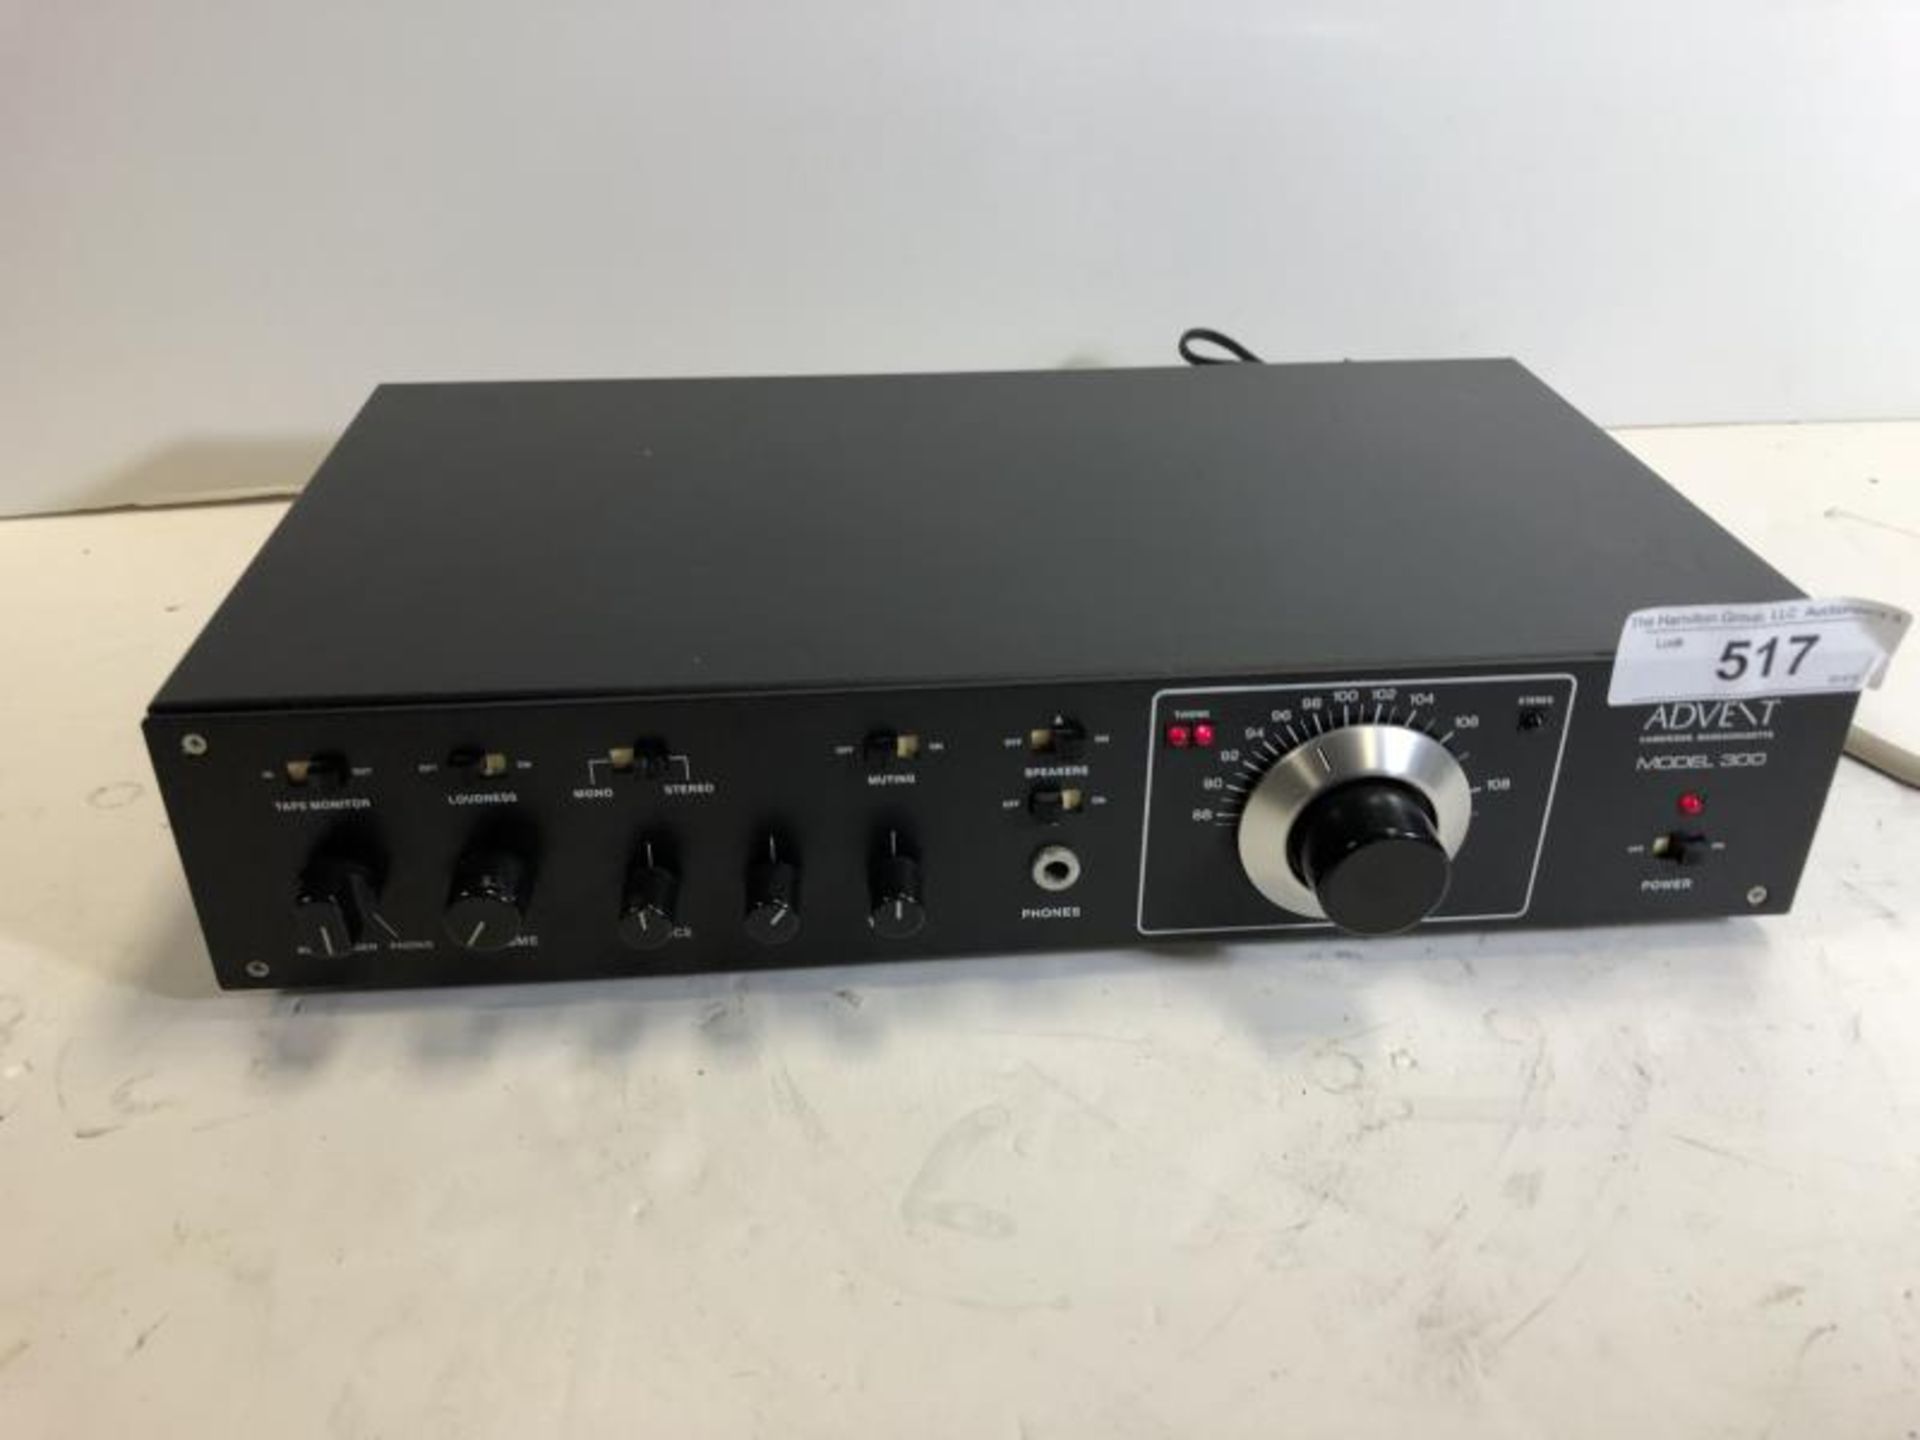 Advent Model 300 stereo tuner, tested - powers up